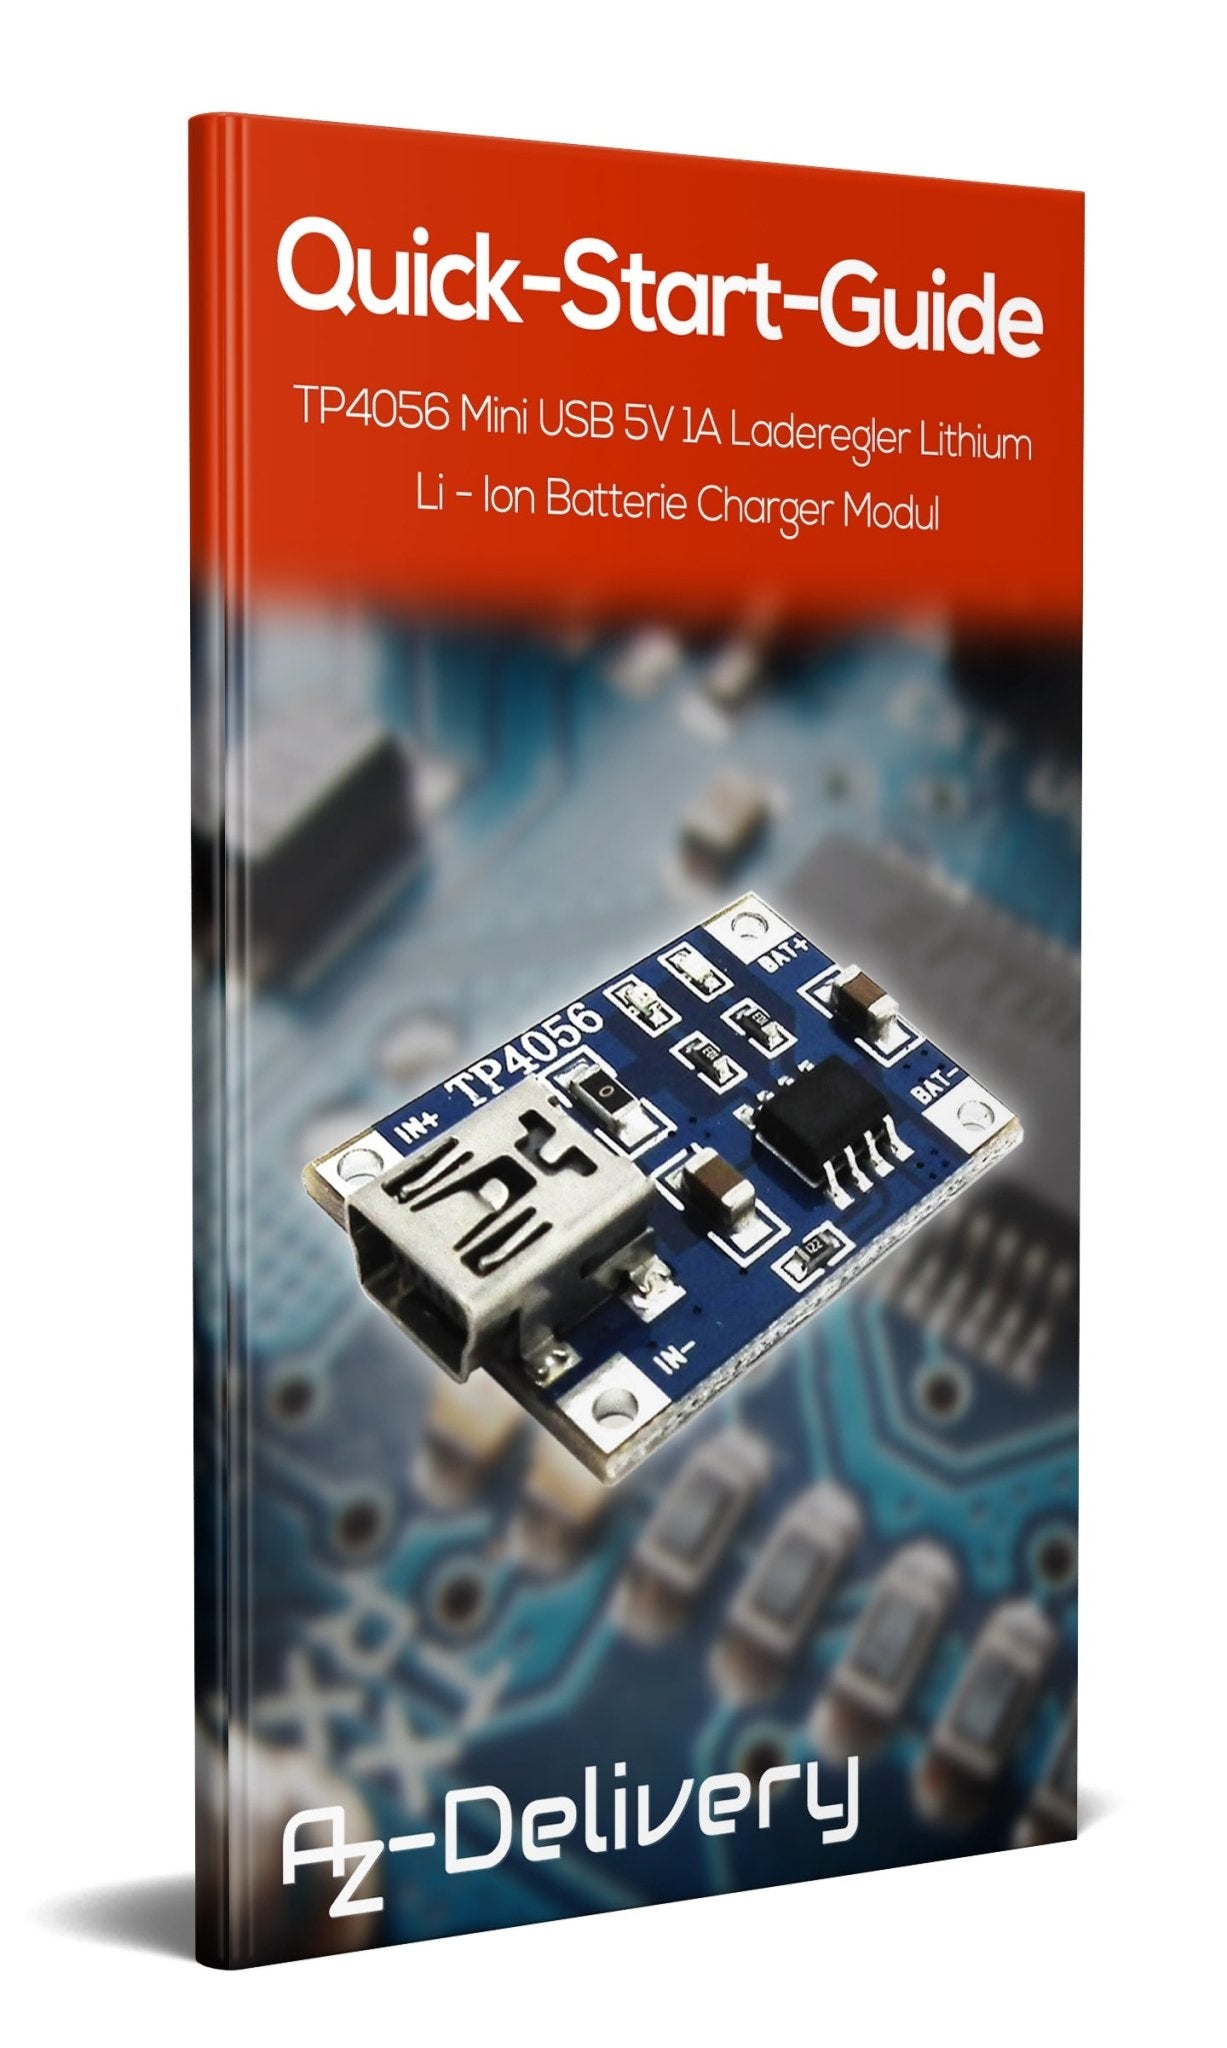 CHARGEUR USB 5V 1A